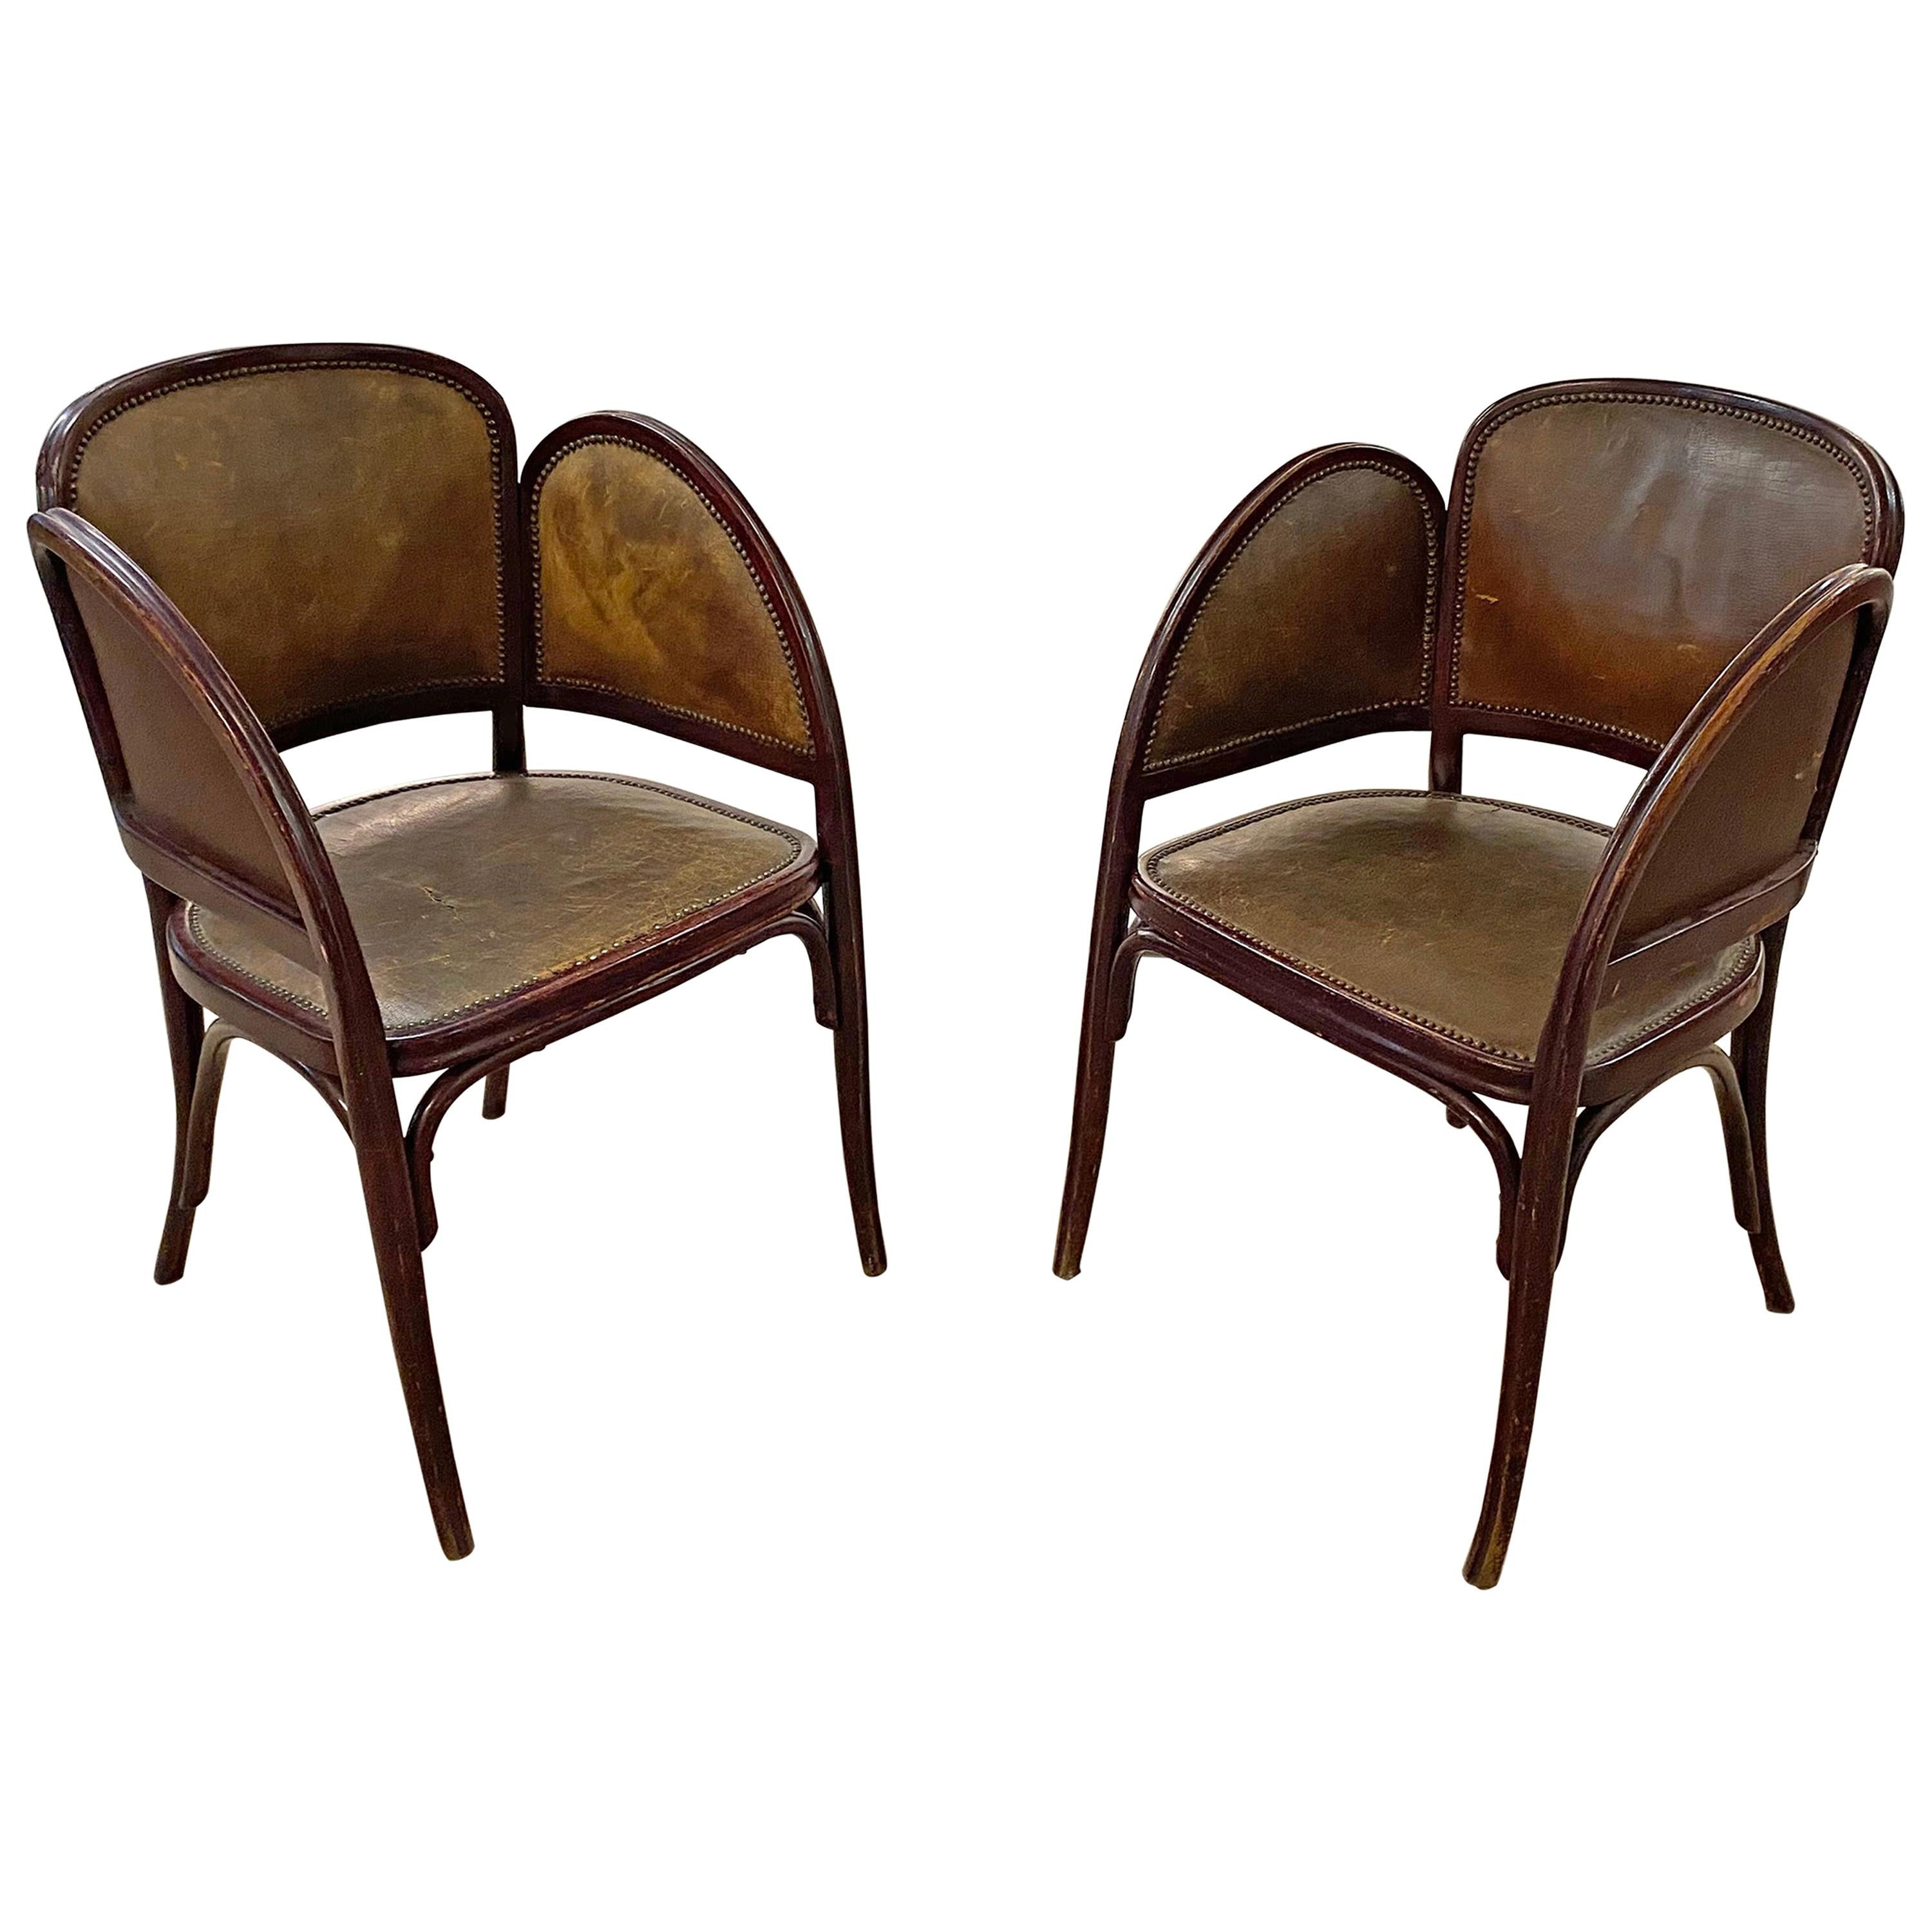 Pair of Vintage "Cafés" Chairs Signed Thonet